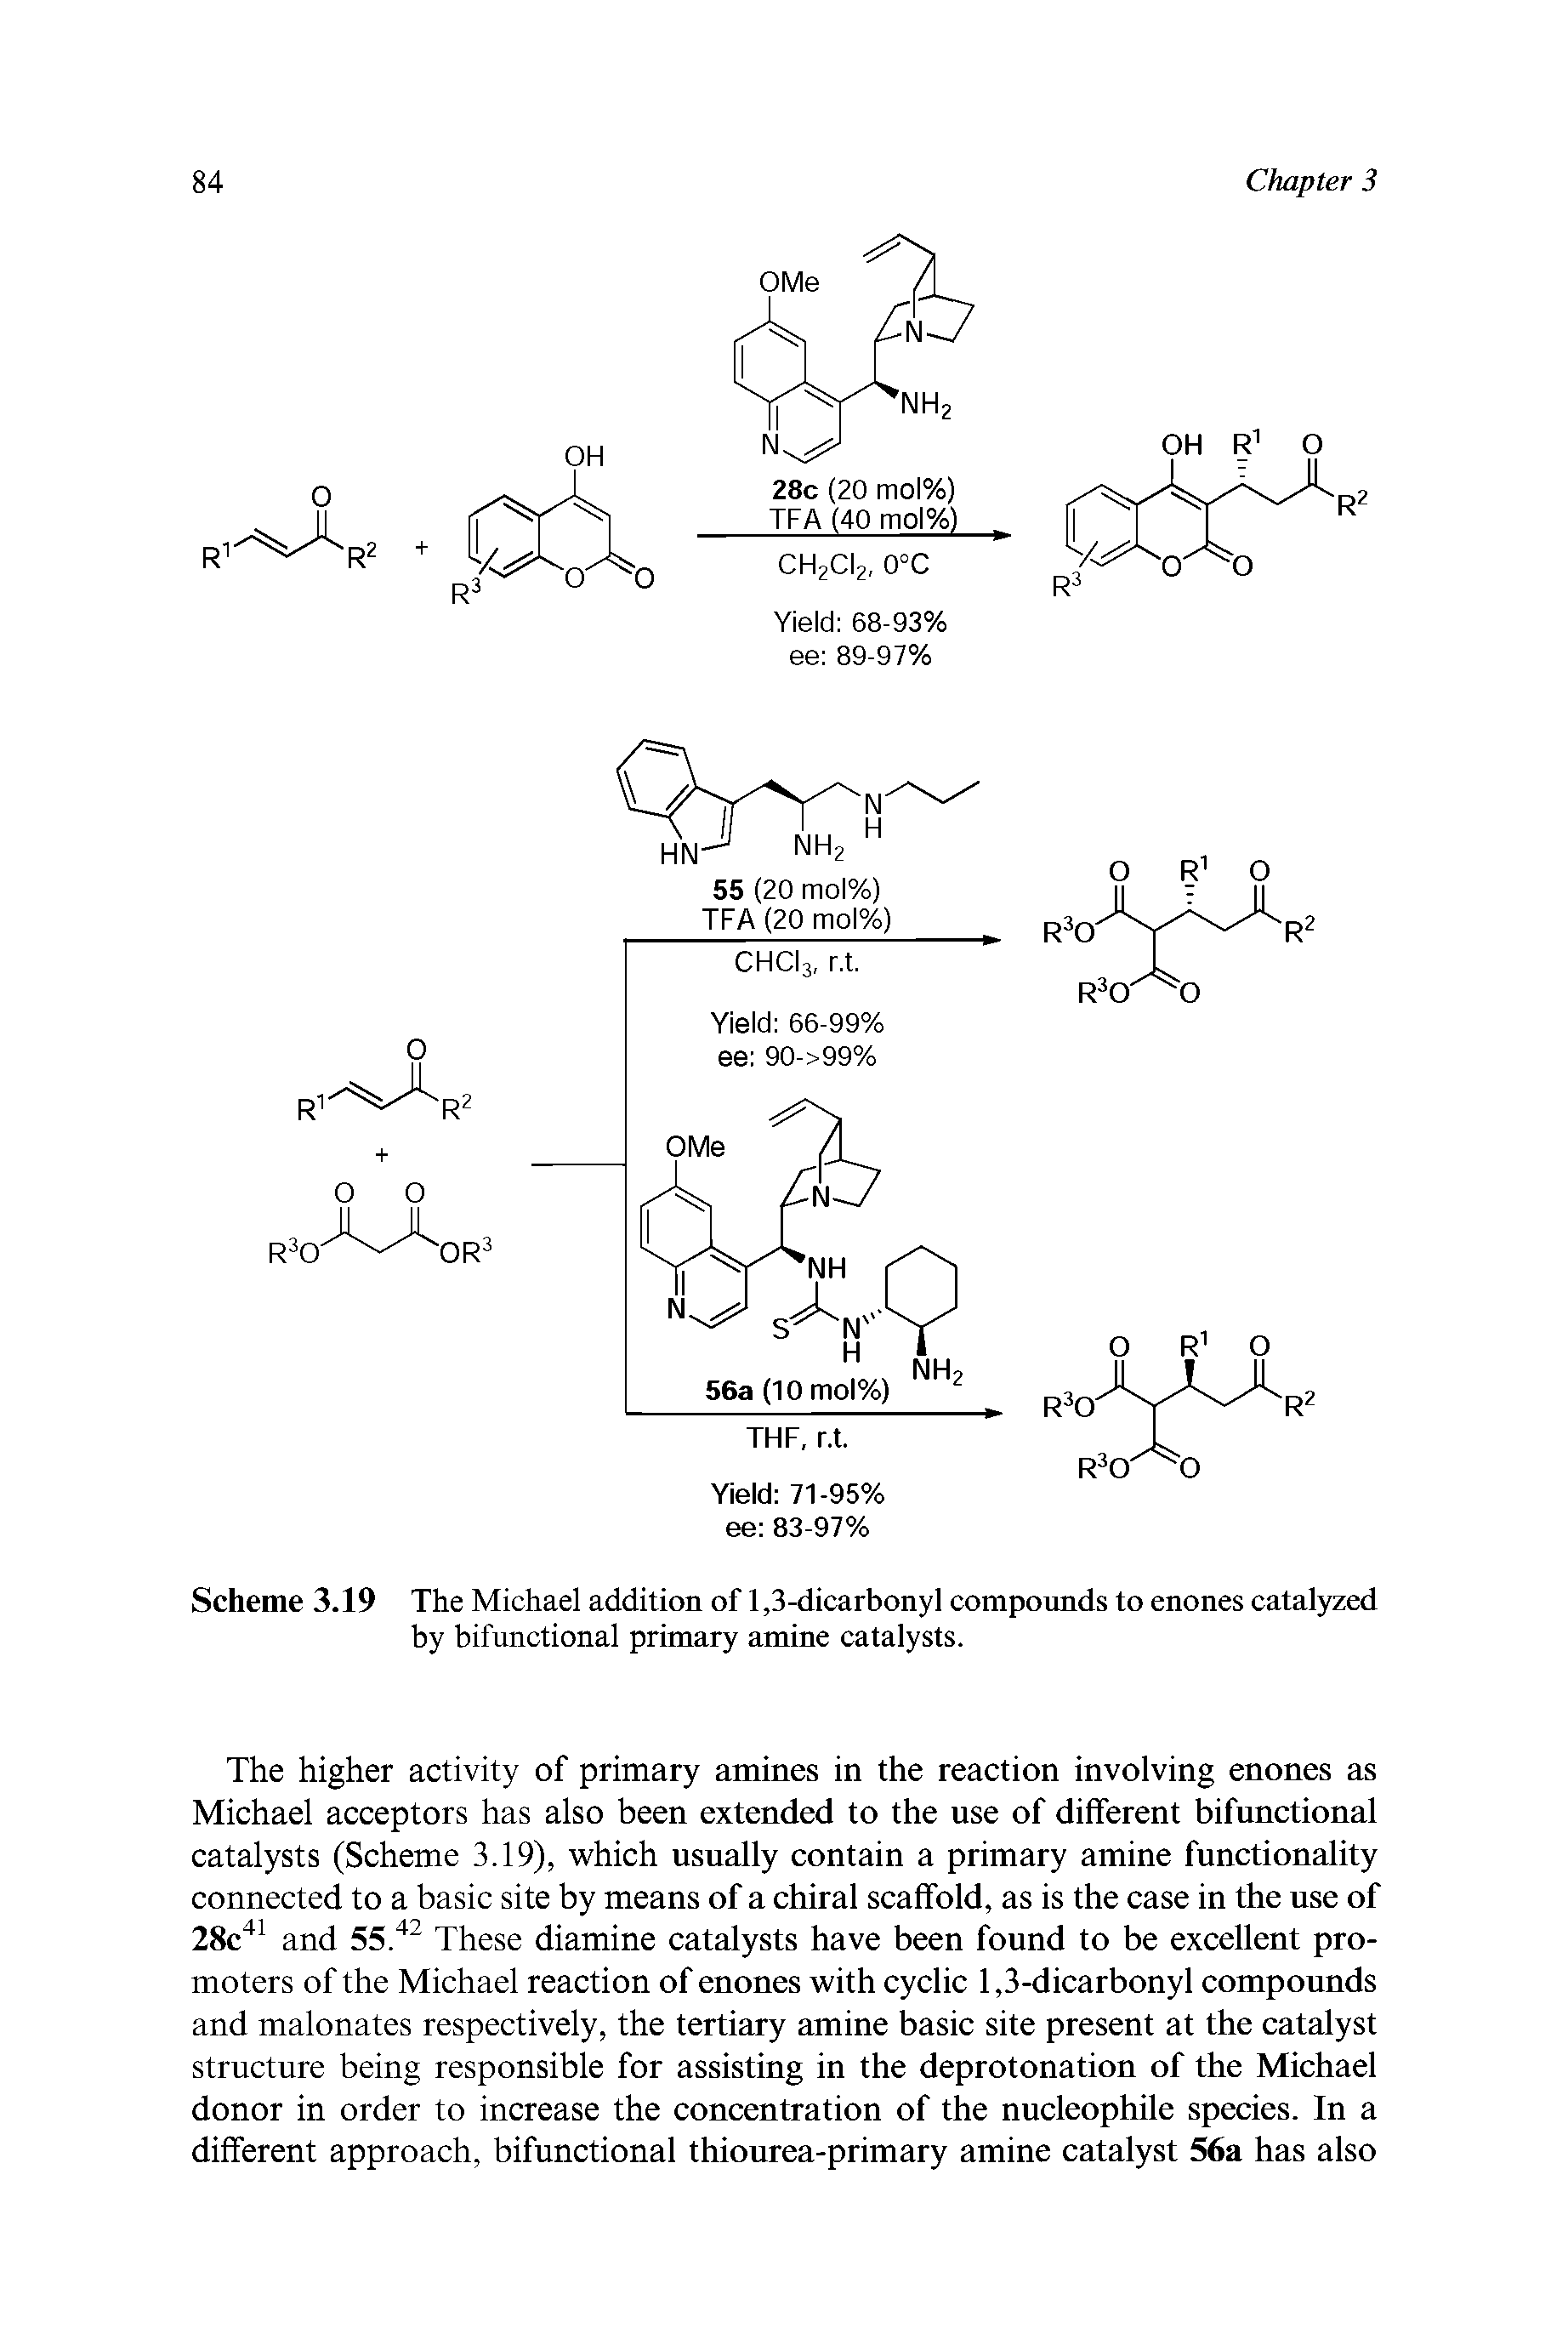 Scheme 3.19 The Michael addition of 1,3-dicarbonyl compounds to enones catalyzed by bifunctional primary amine catalysts.